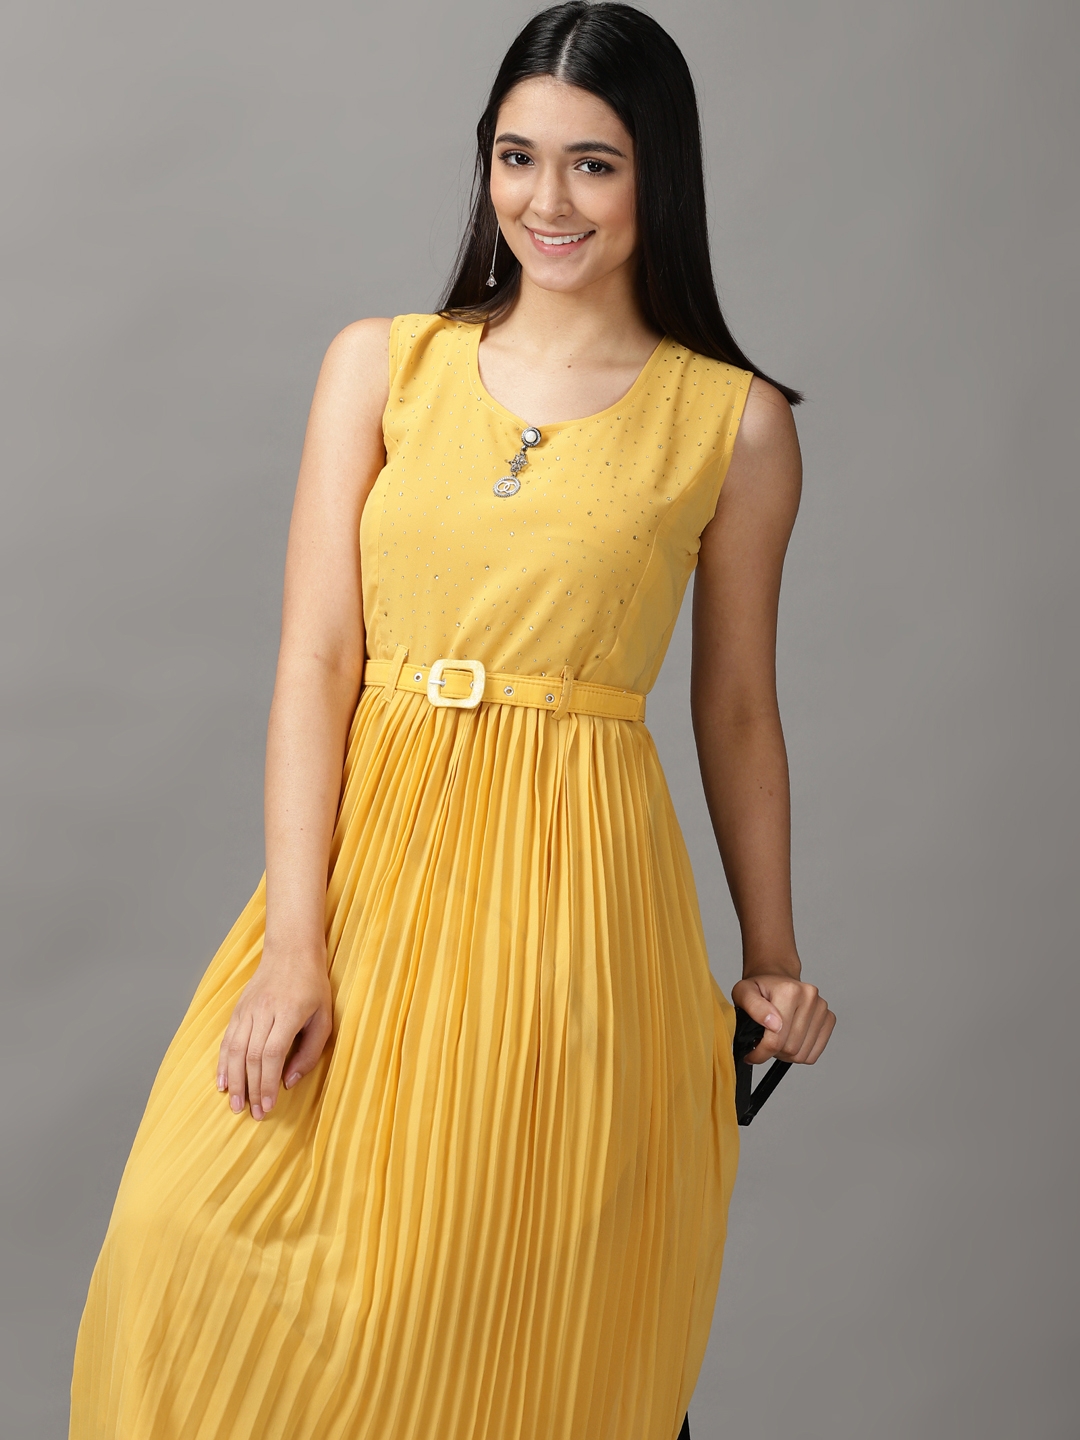 Terquois Polka Design Yellow Casual Dress with VNeckGathers and Fash   Terquois Klothing